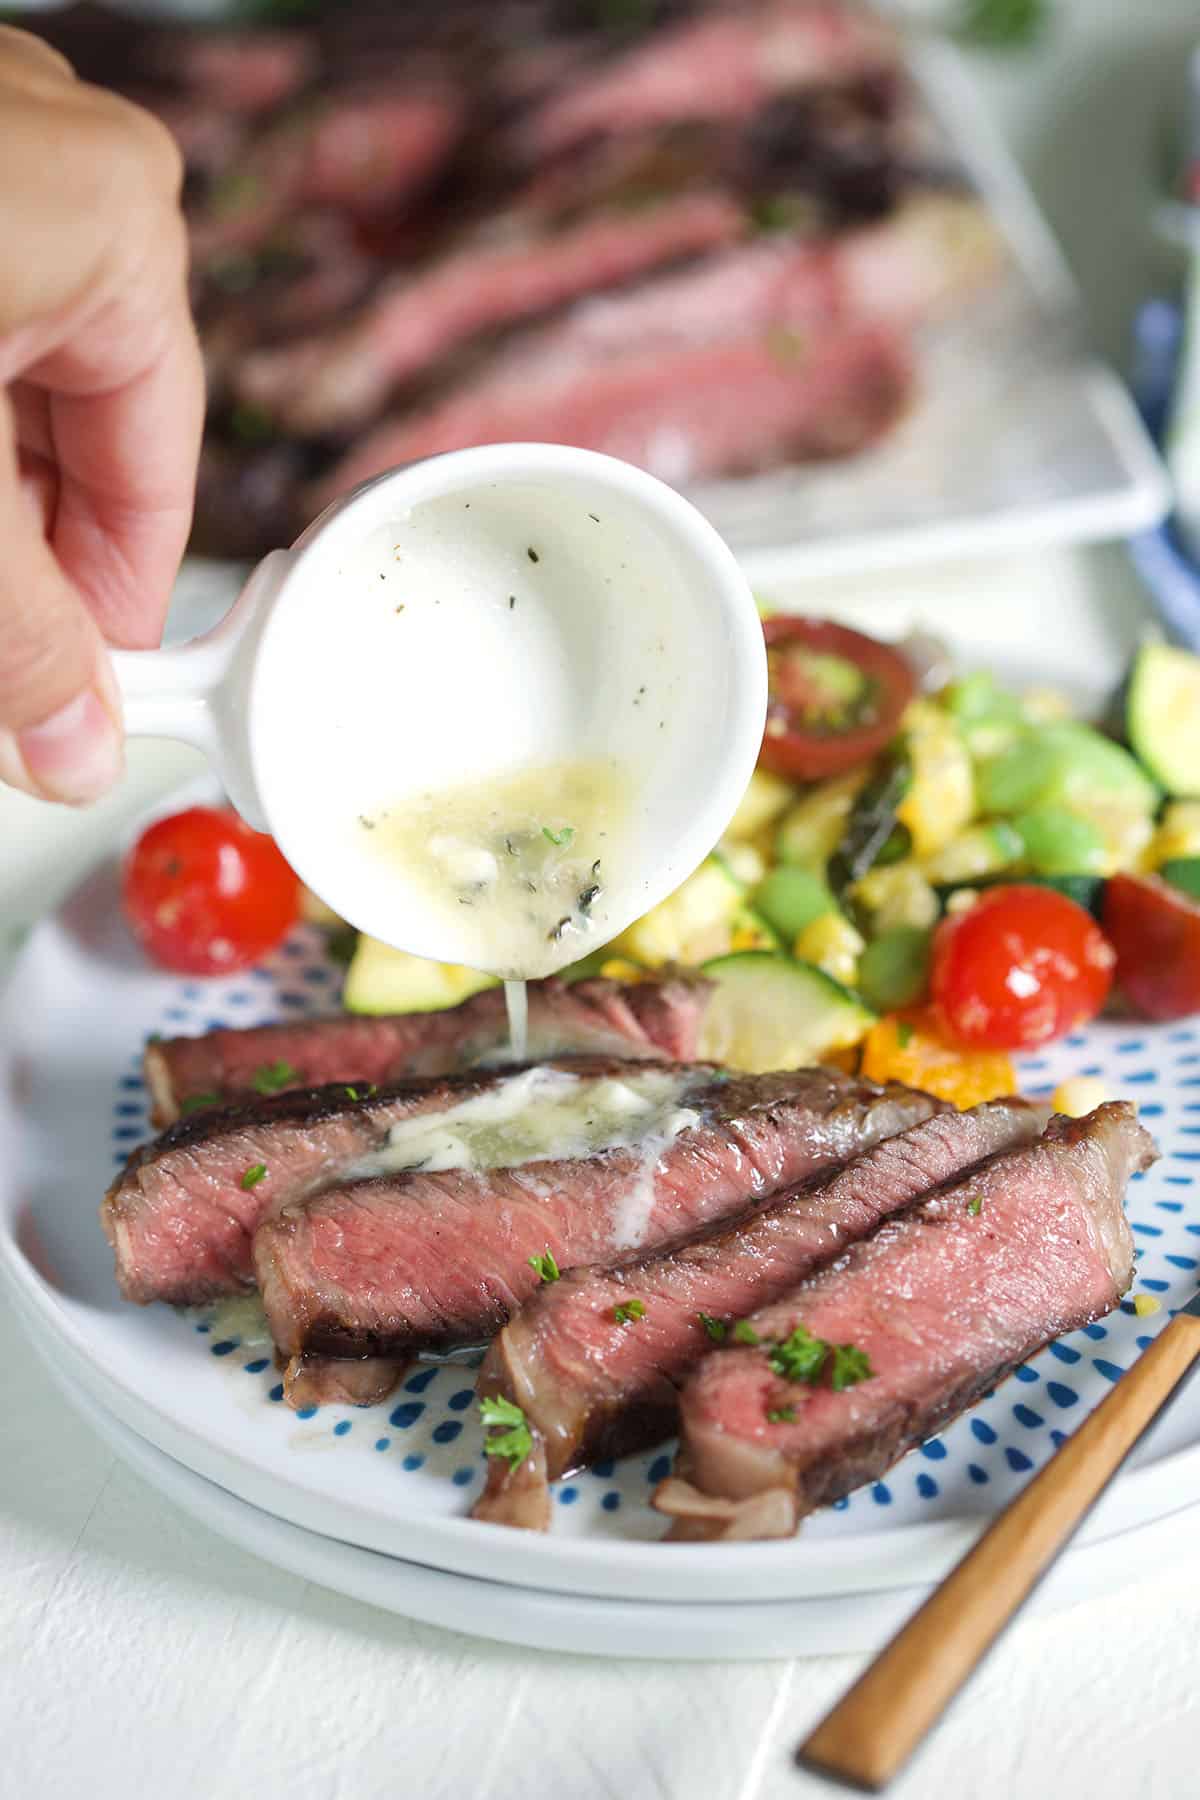 Garlic butter sauce is being drizzled over sliced steak. 